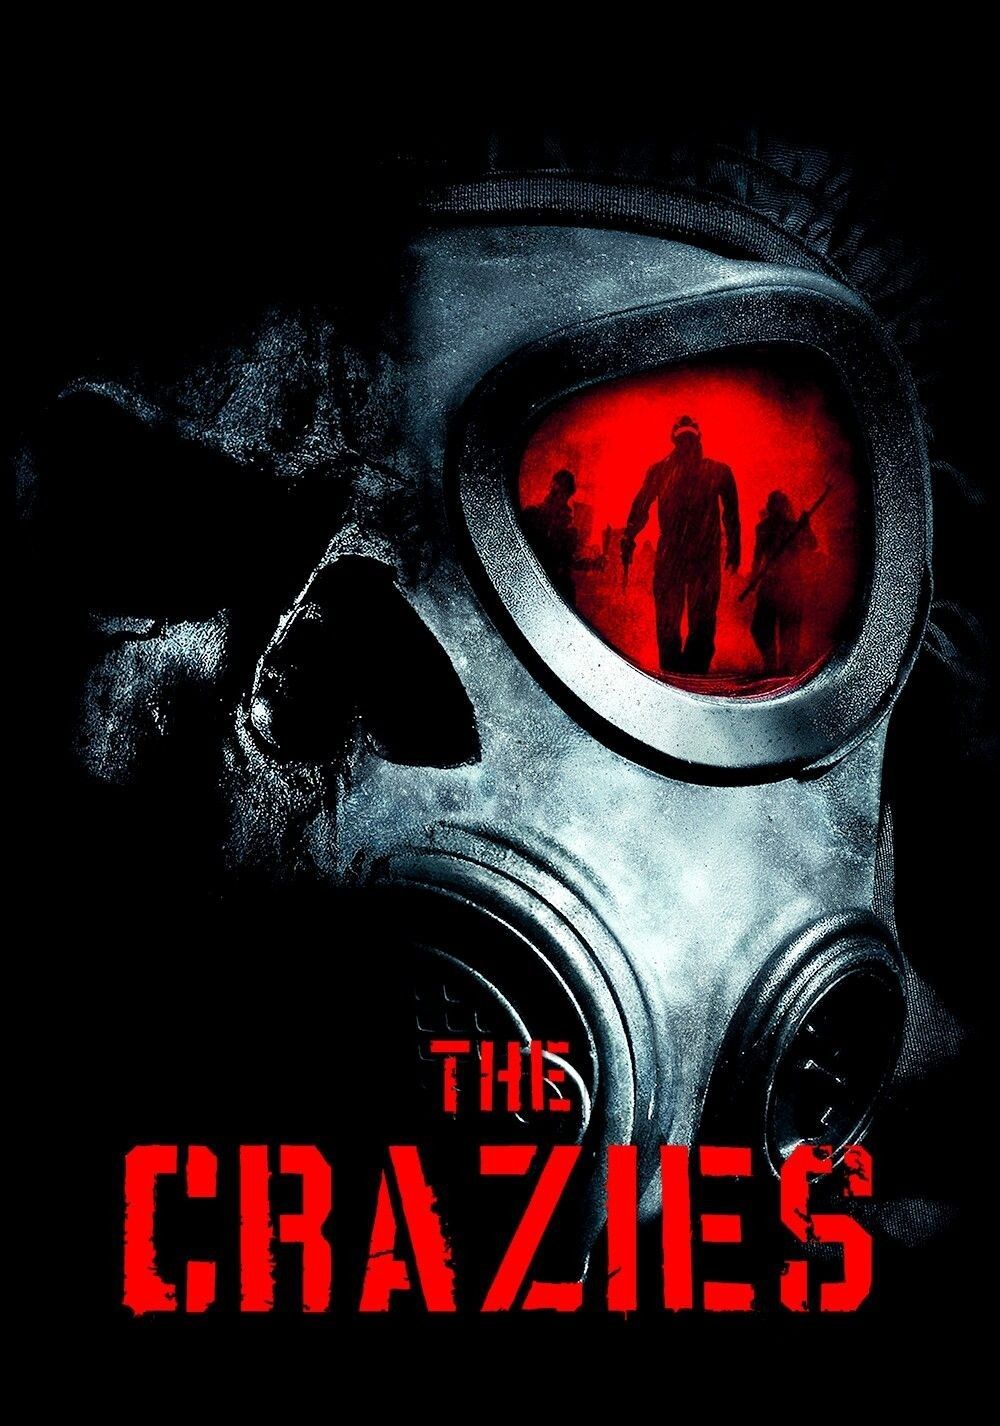 The Crazies Main Poster